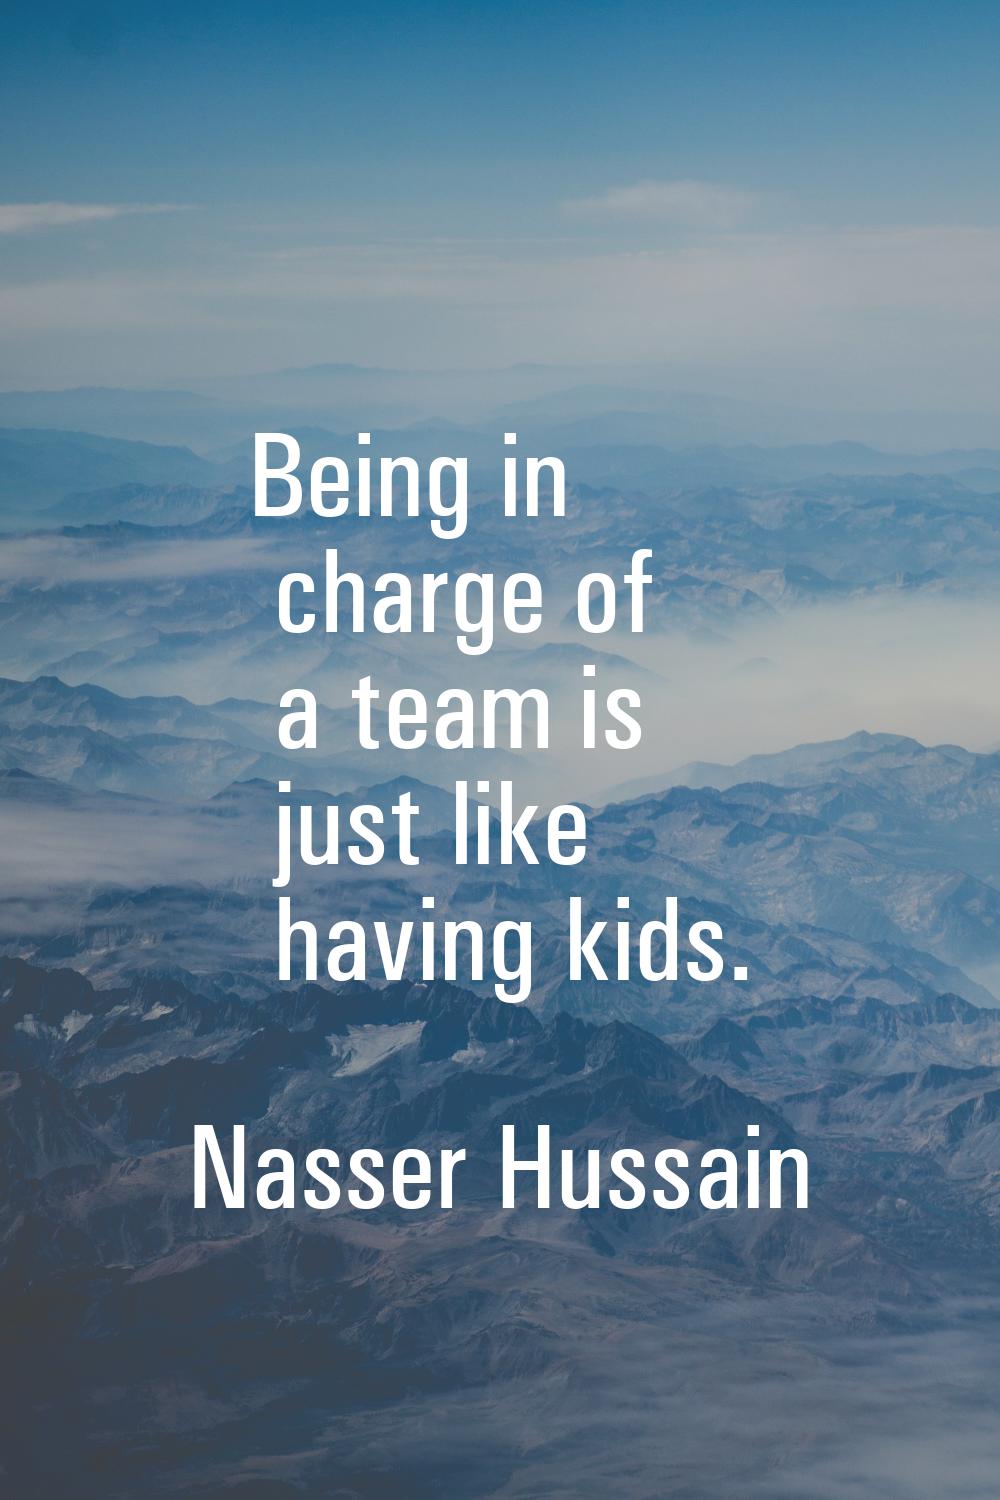 Being in charge of a team is just like having kids.